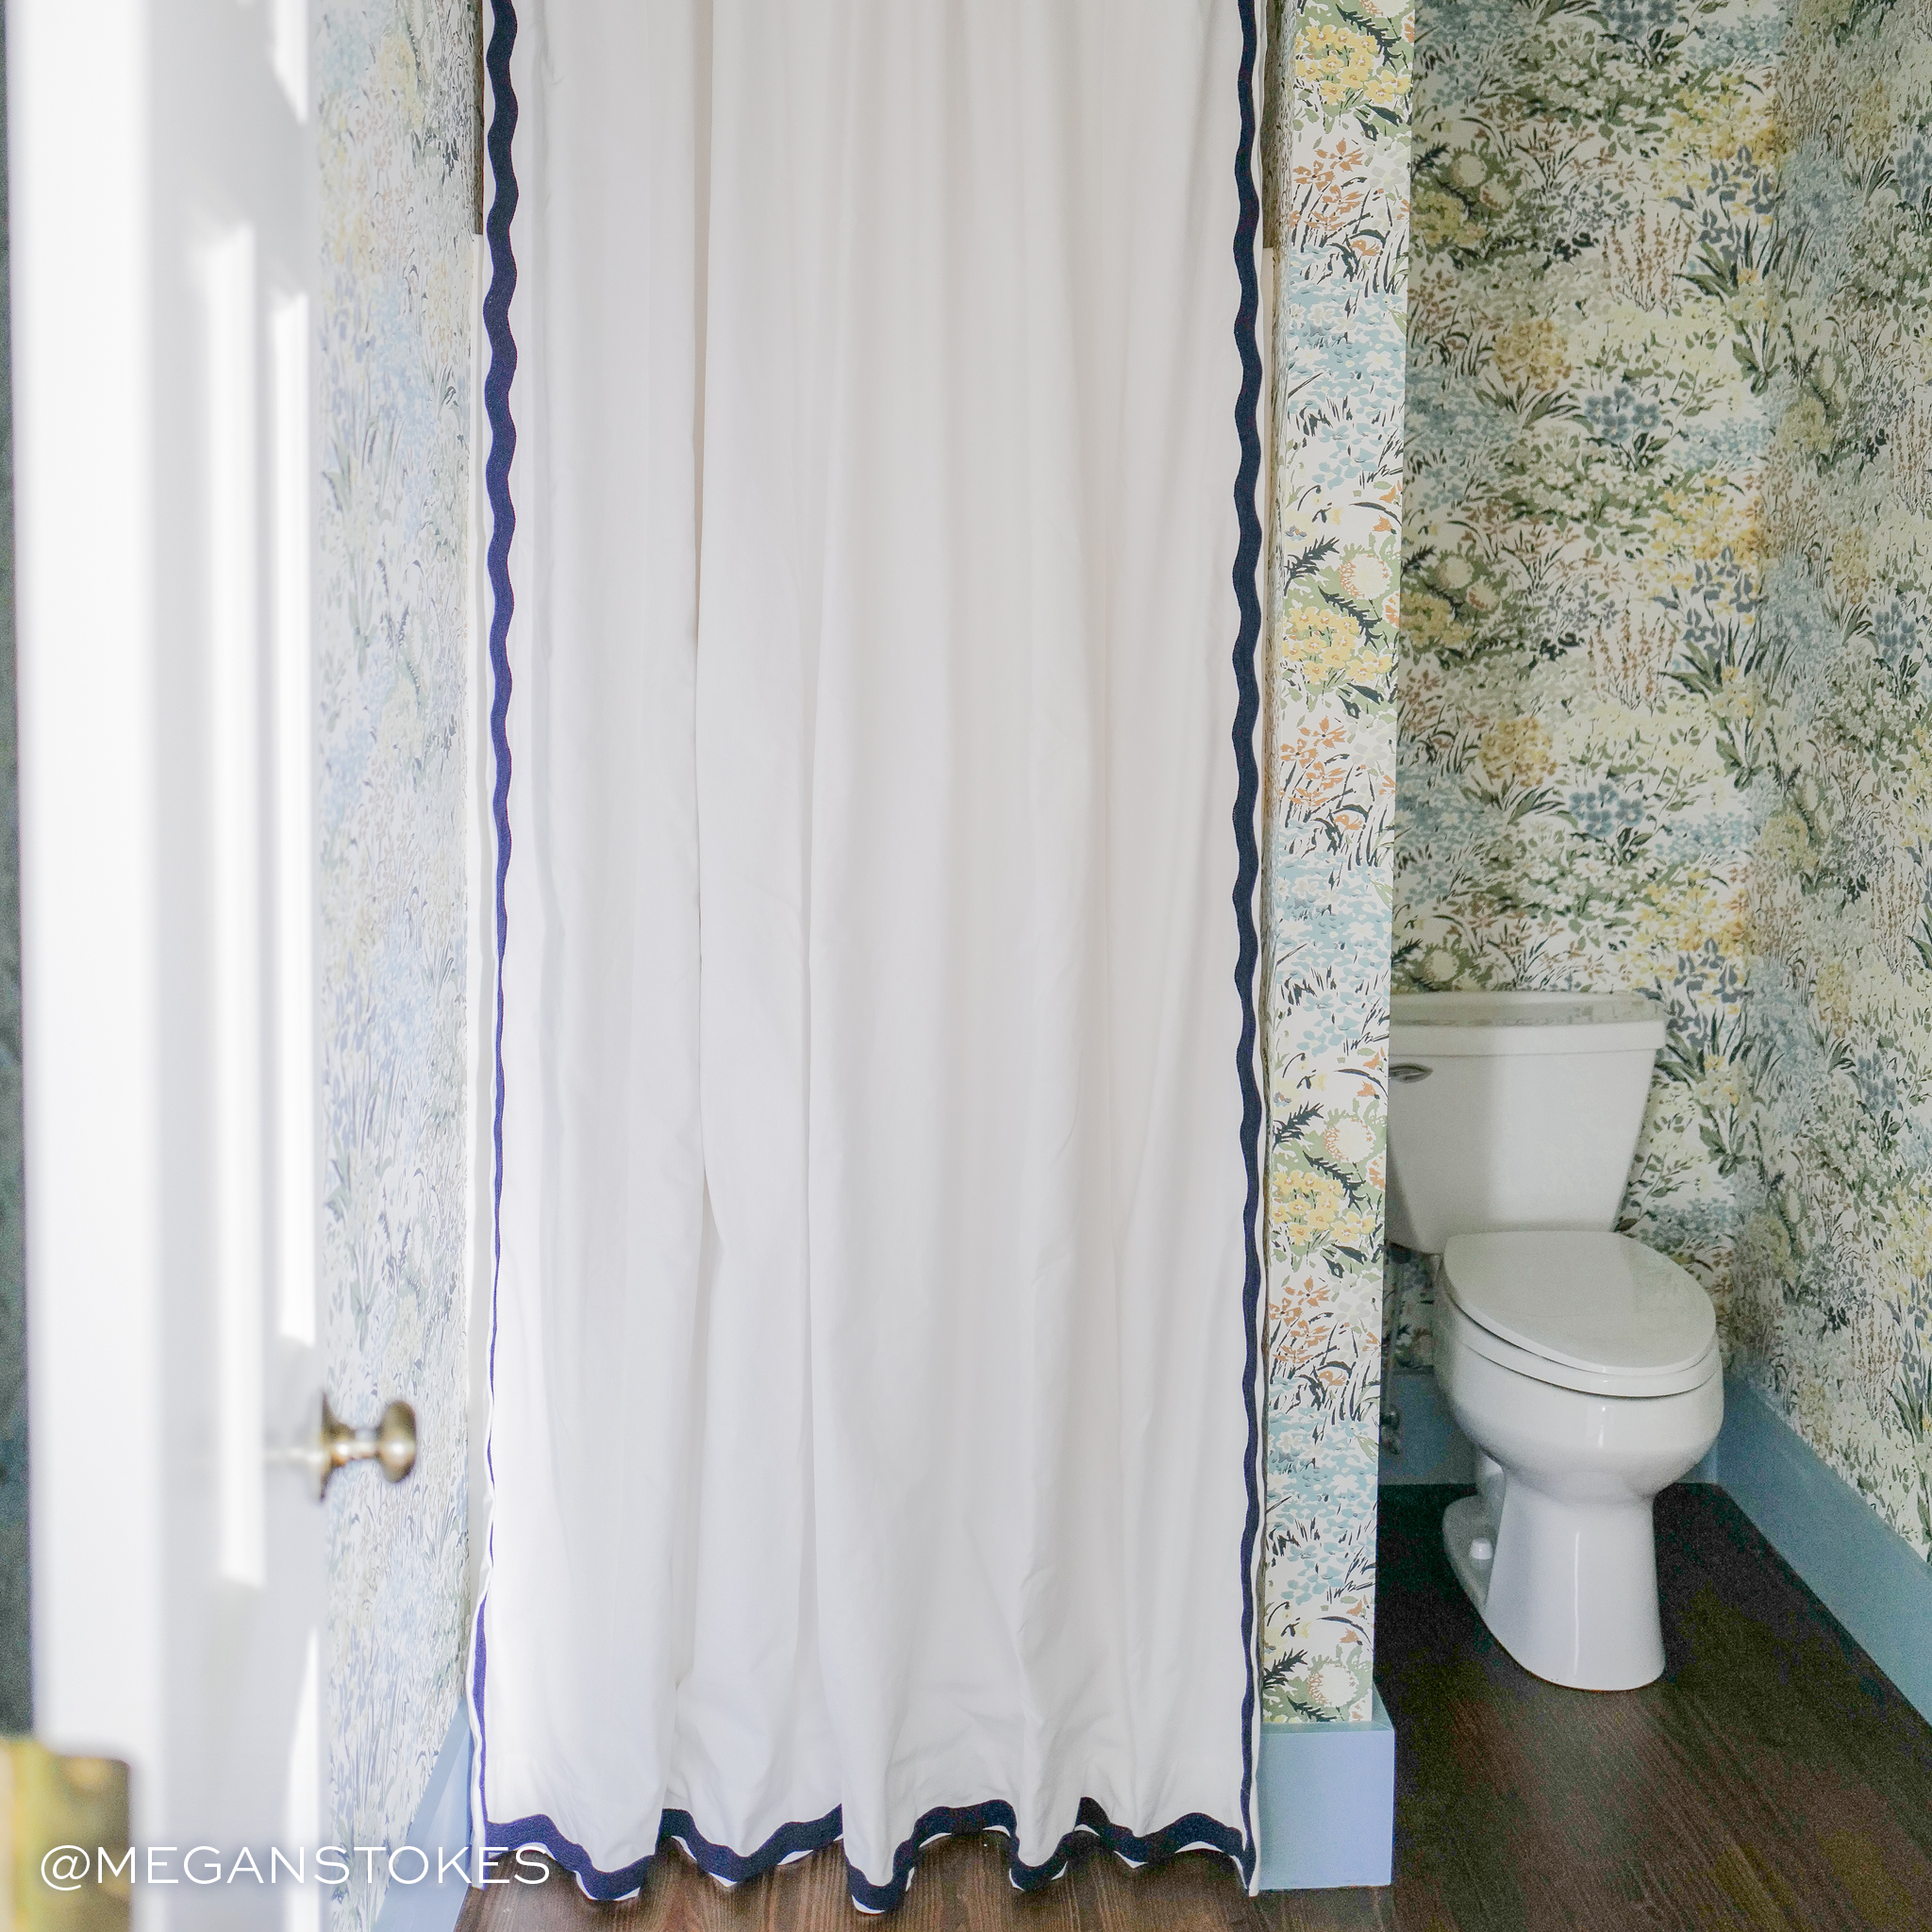 White Cotton shower curtain hanging on rod in bathroom with blue green and yellow floral wallpaper